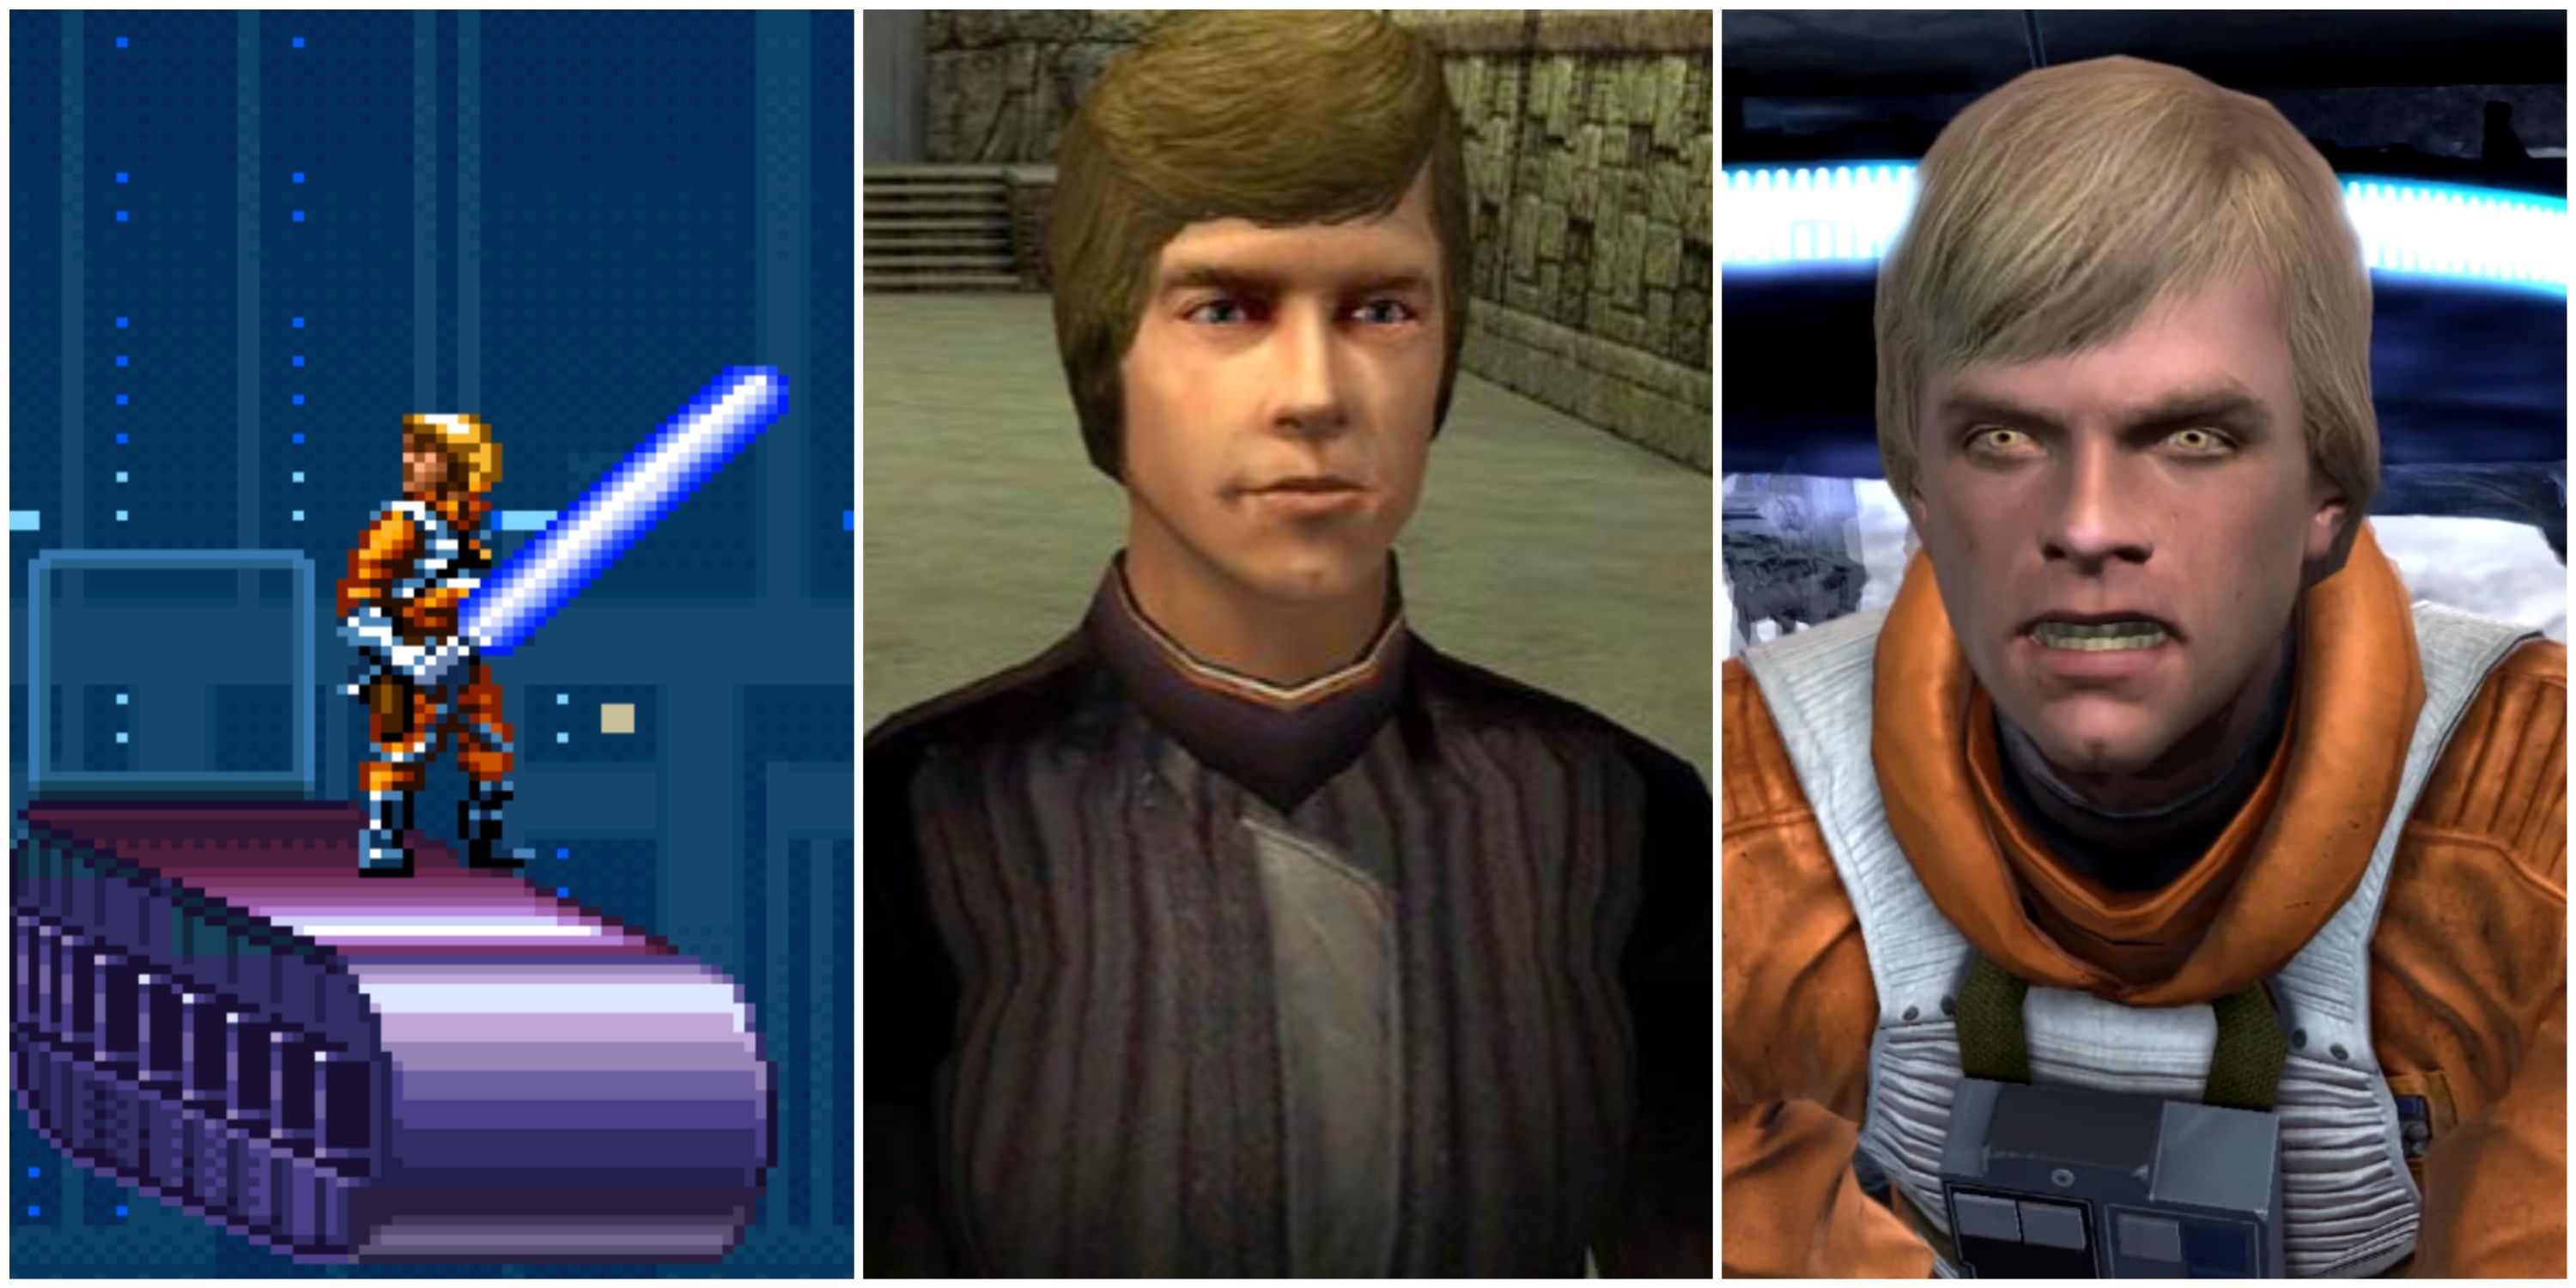 Luke Skywalker in Super Star Wars, Jedi Outcast, and The Force Unleashed